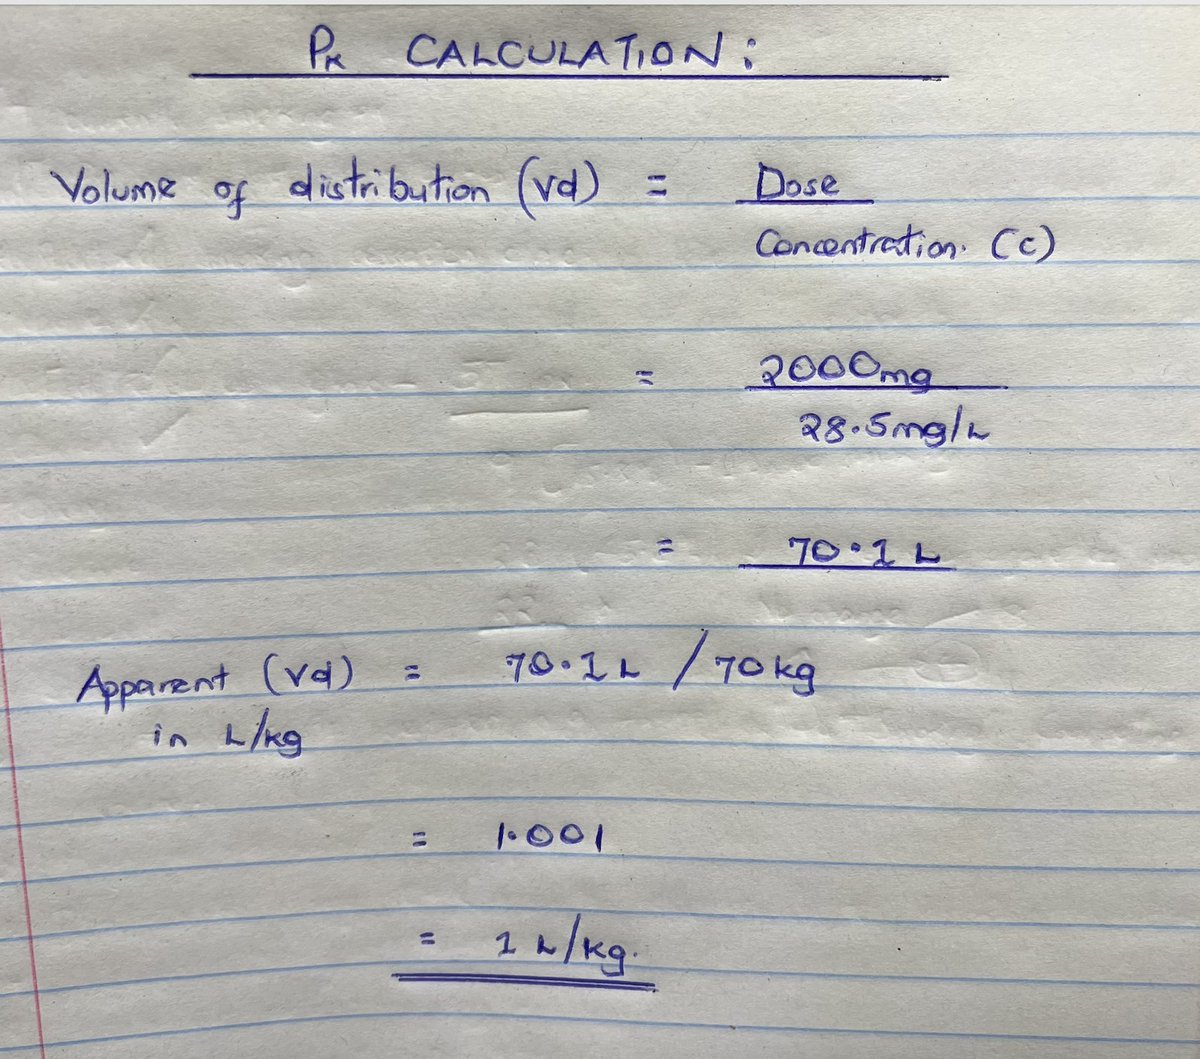 Correct answer = A. 

Vd = dose/C = 2000 mg/28.5 mg/L = 70.1 L. Because the patient is 70 kg, the apparent volume of distribution in L/kg will be approximately
1 L/kg (70.1 L/70 kg).

The calculation is also attached as below:

#Pharmacokinetics
#MedX
#PharmaMed